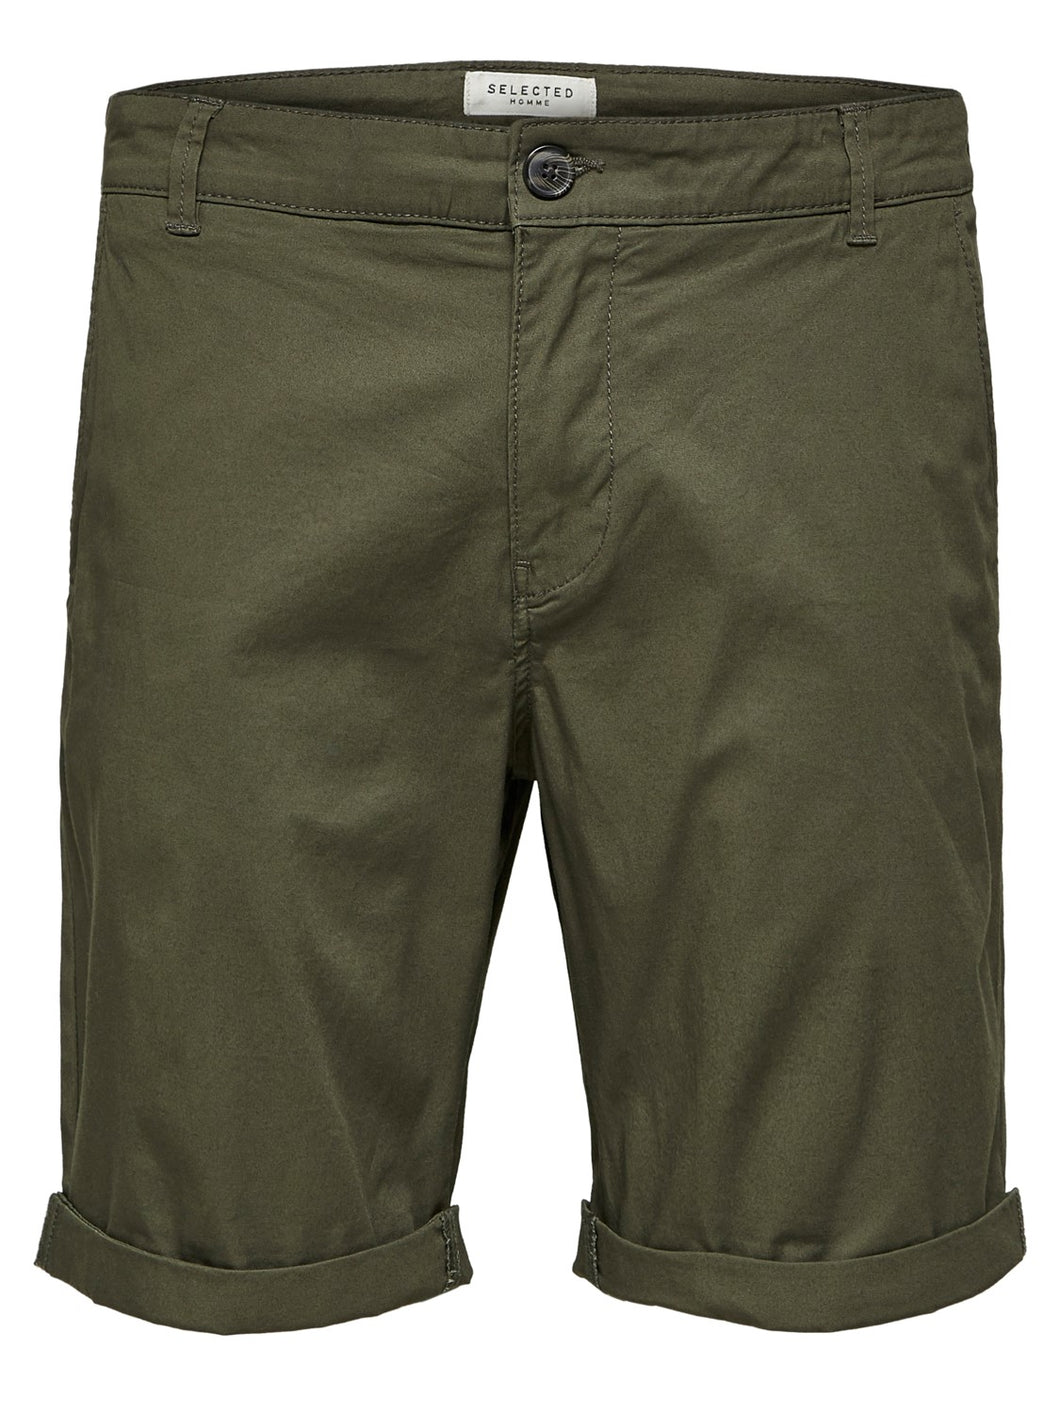 Selected Homme Paris Chino Shorts Olive